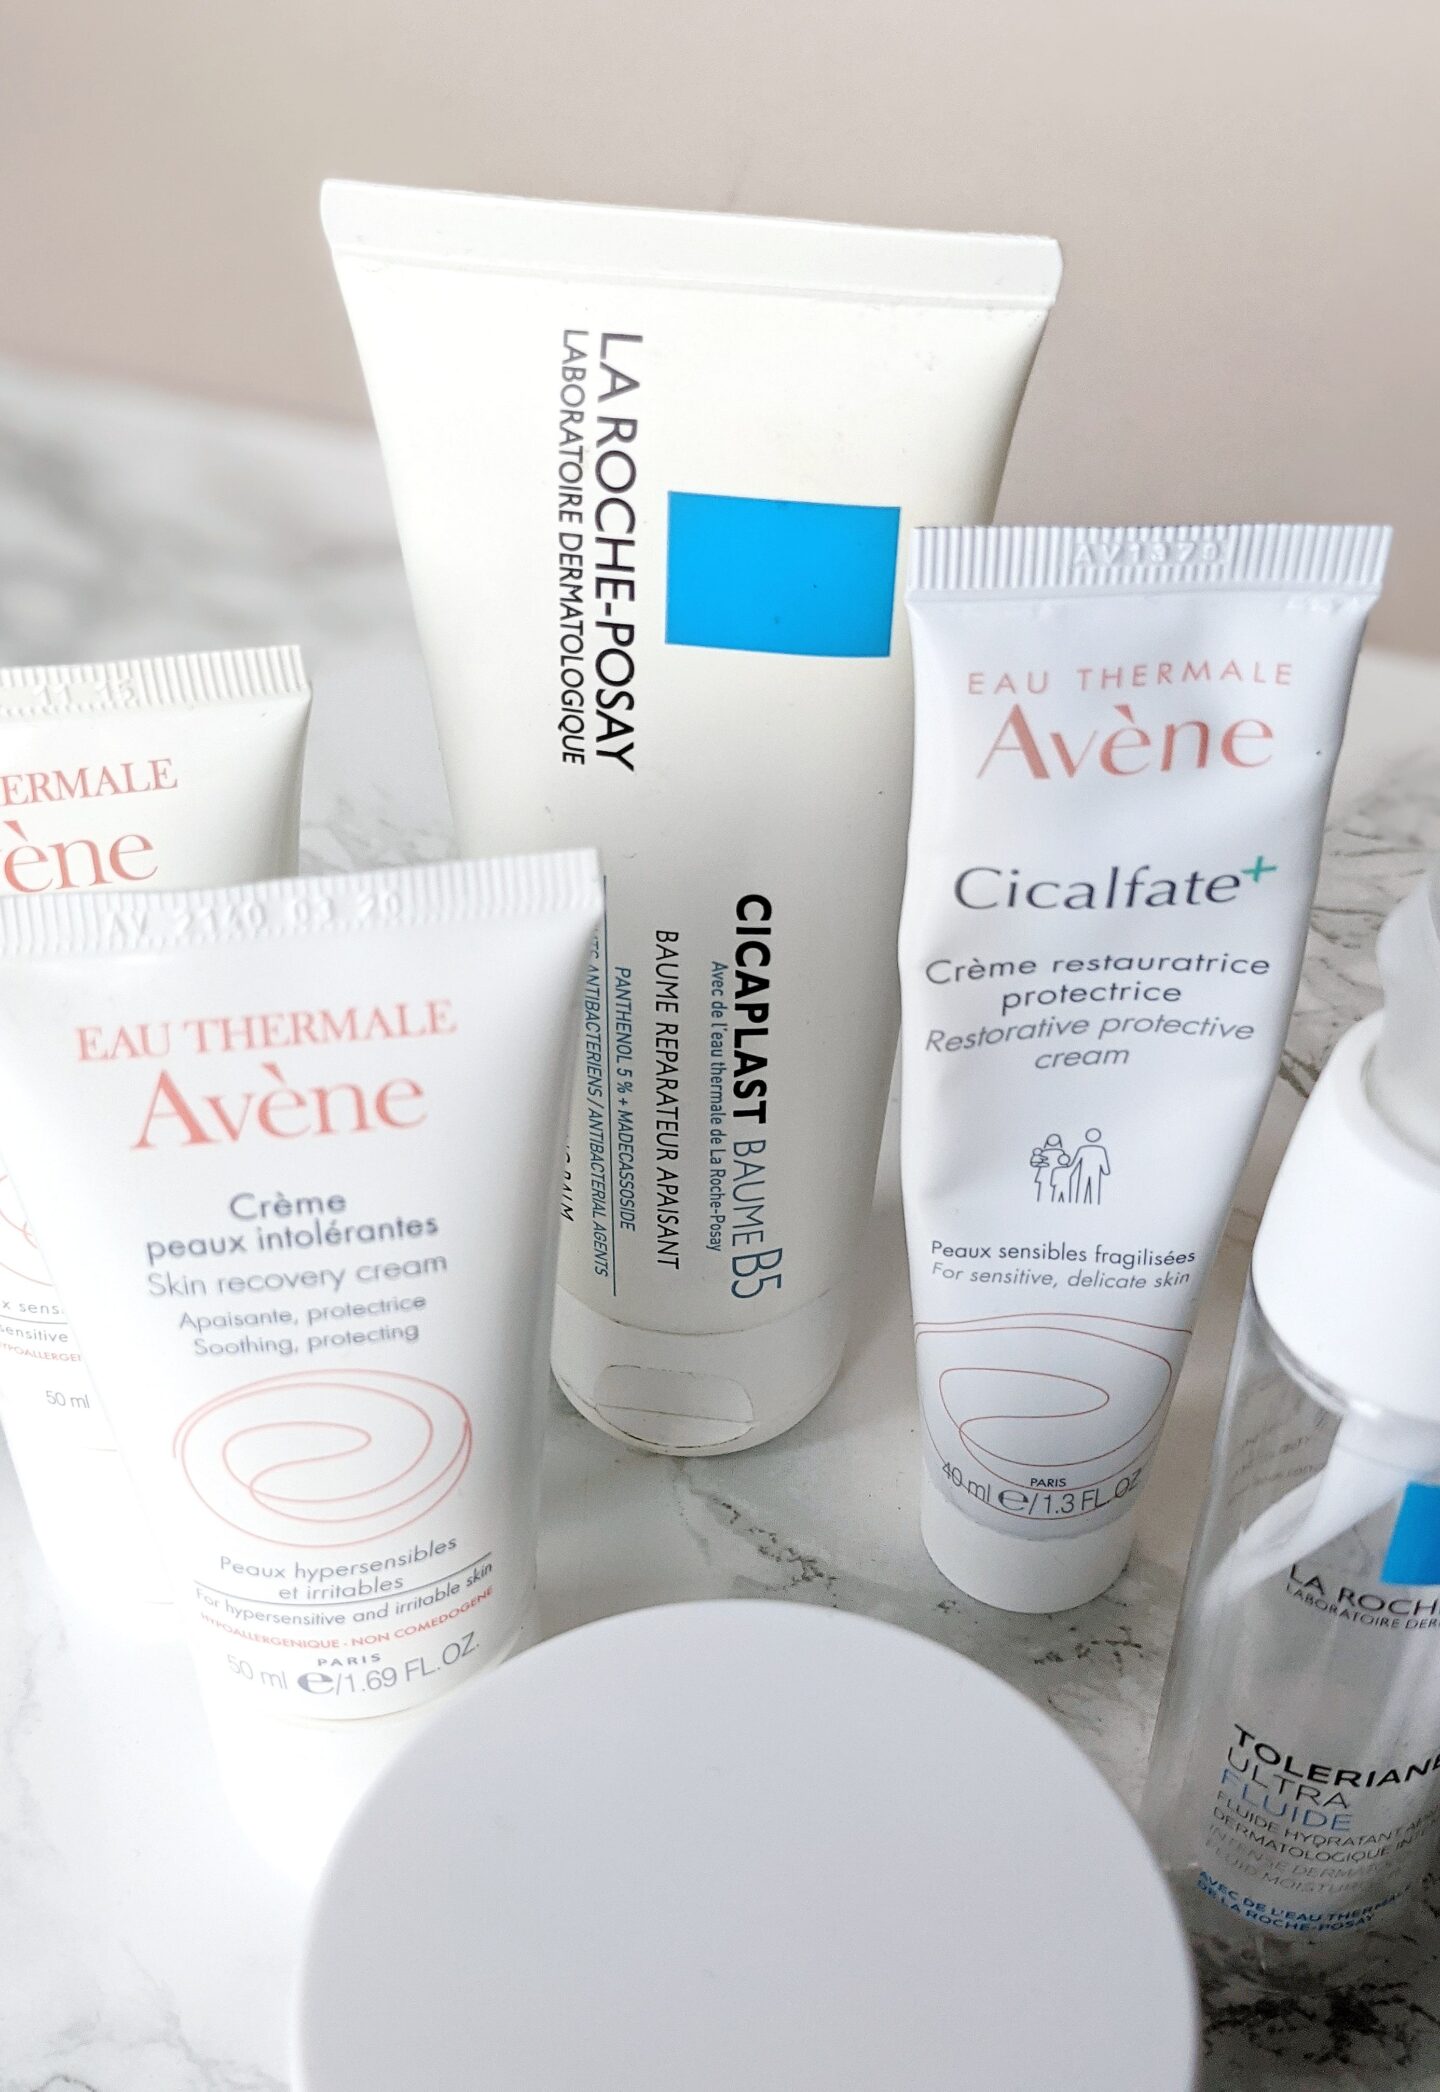 The best moisturisers for rosacea and sensitive skin. Trying to find the best skincare routine for rosacea? My blog can help. Skincare that doesn't irritate rosacea. #talontedlex